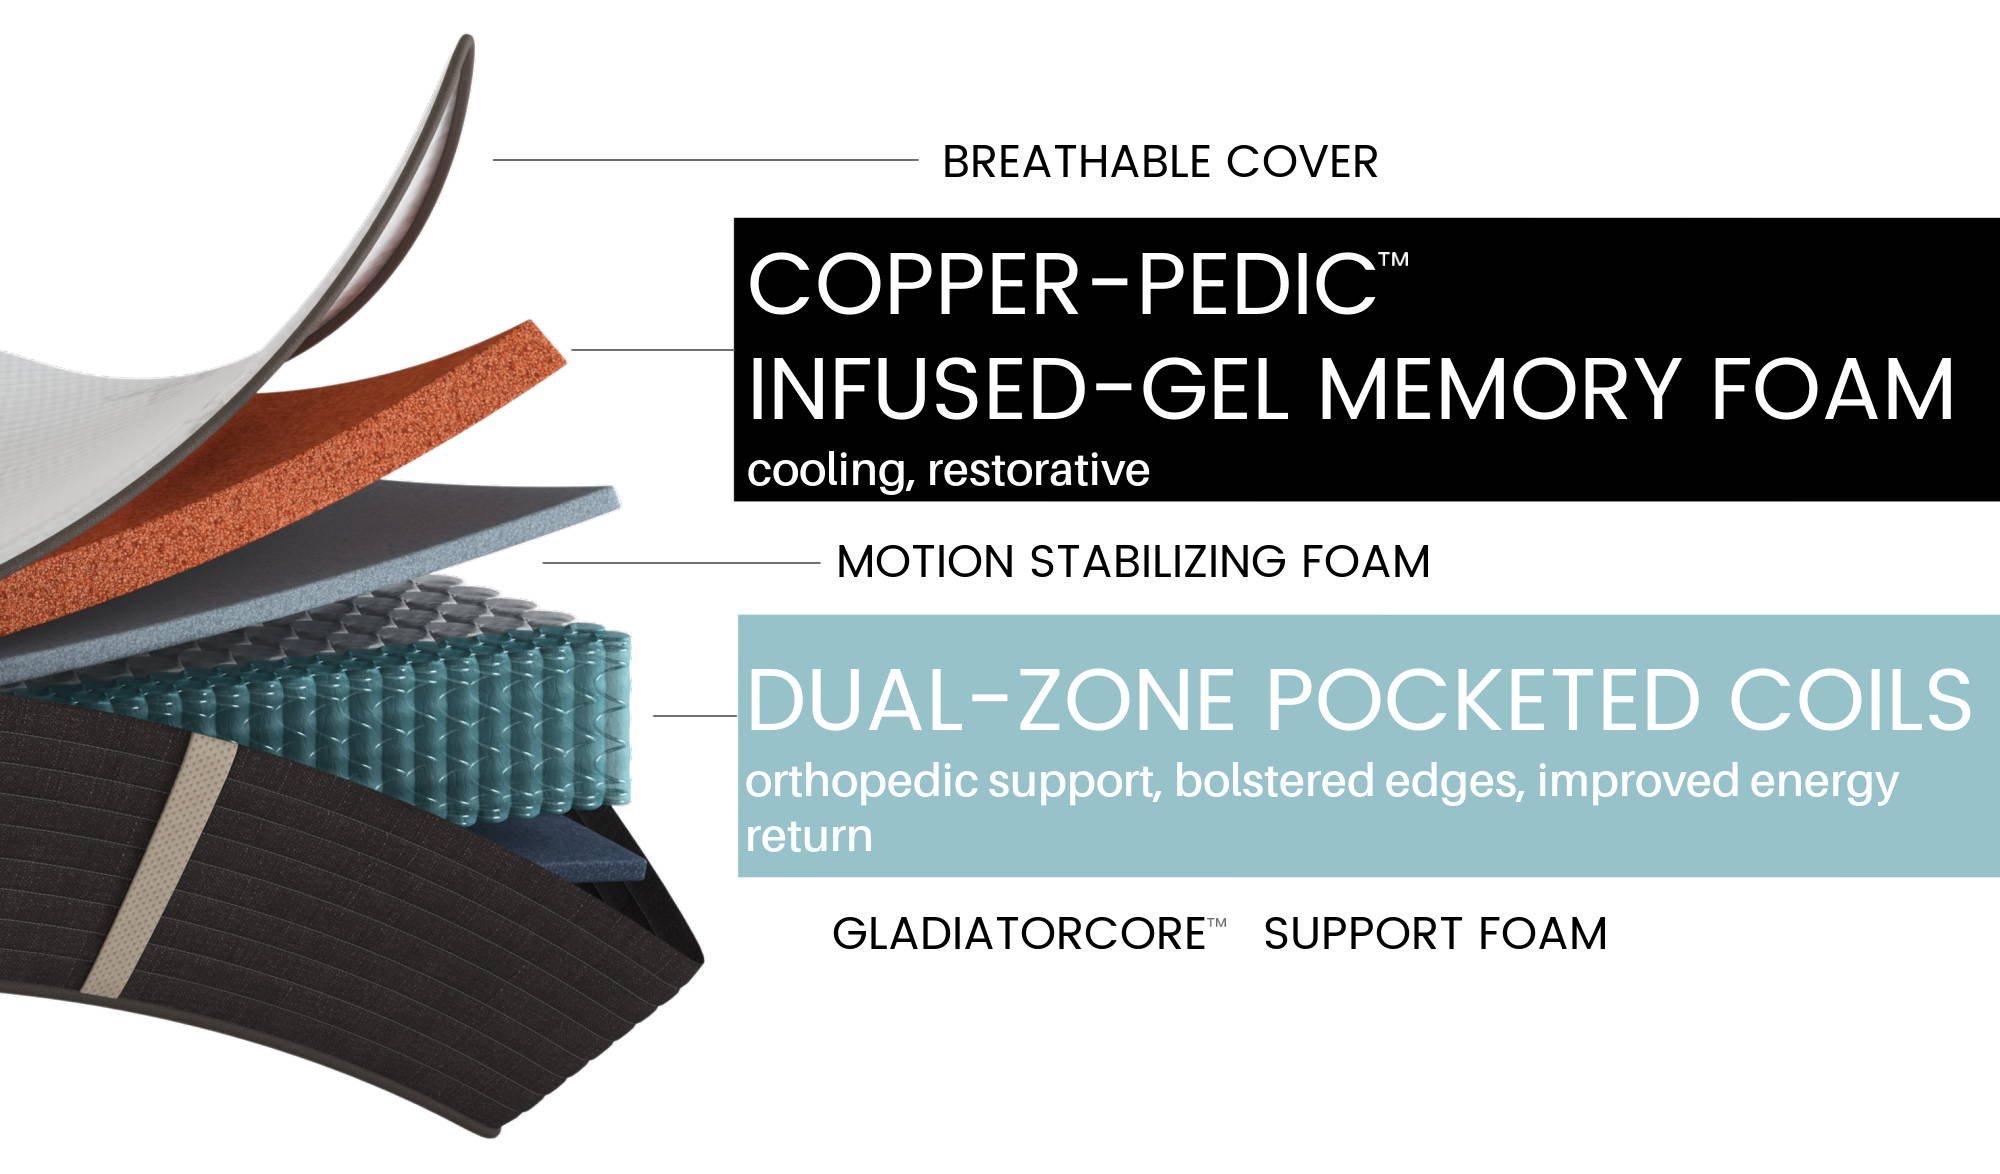 Open mattress with layers showing: soft organic cotton fabric, copper-infused cooling memory foam, motion stabilizing foam, dual-zone coils with bolstered sides, support foam made from plant-based GladiatorCore foam.